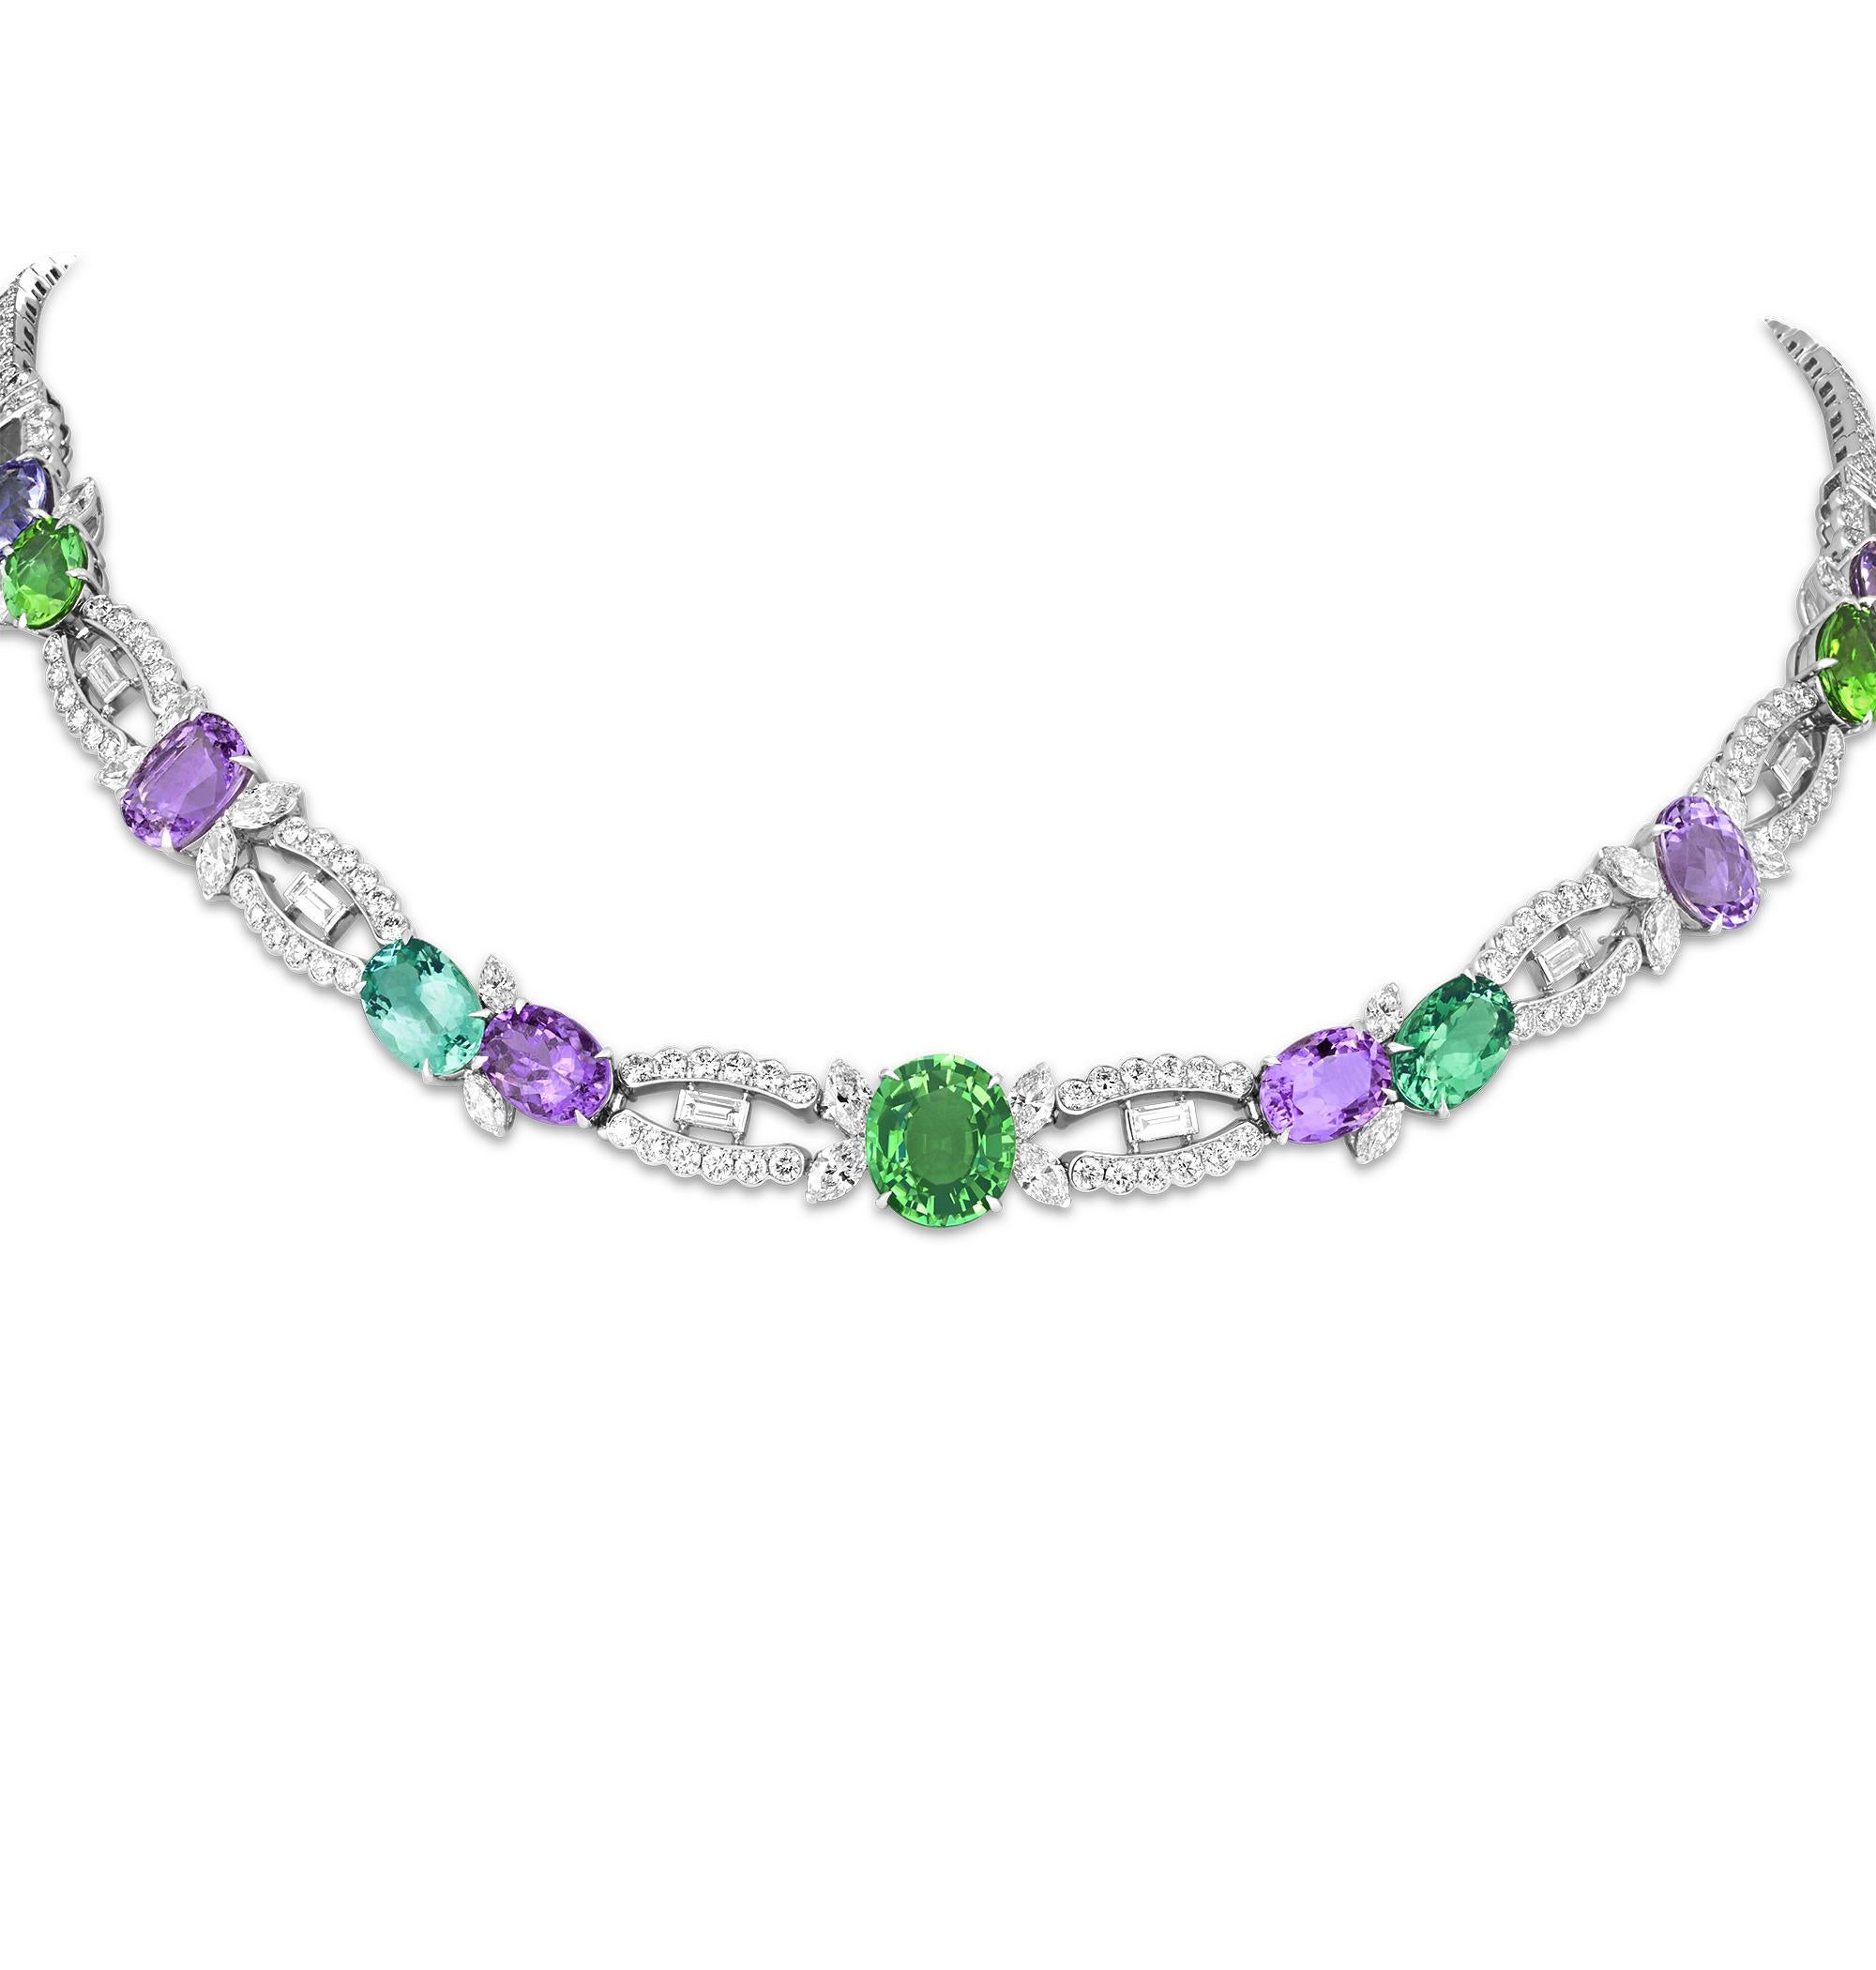 This stunning multicolor Paraiba tourmaline necklace from beloved American jeweler Raymond Yard features 11 of the storied gems in varying hues of blue, purple and green. Totaling 26.08 carats, the Paraibas are certified by the Swiss Gemmological